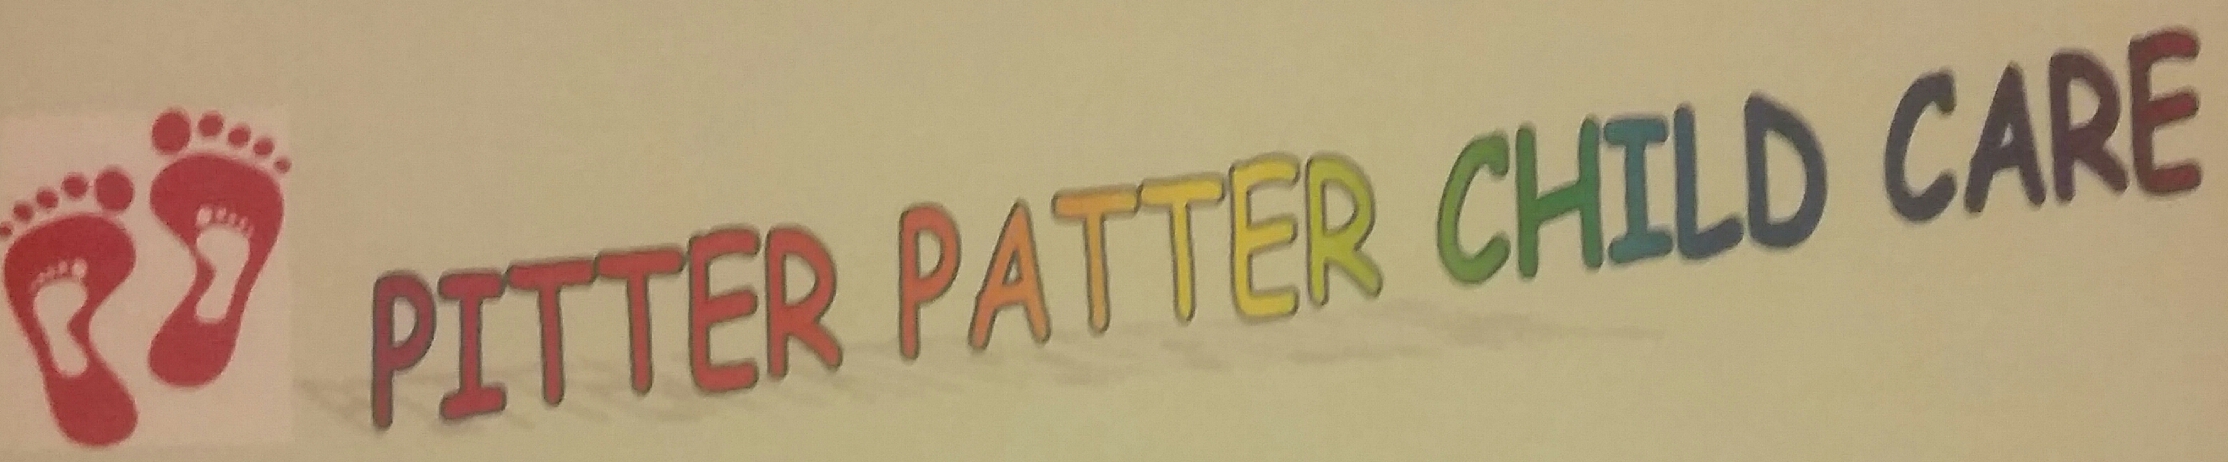 Pitter Patter Child Care